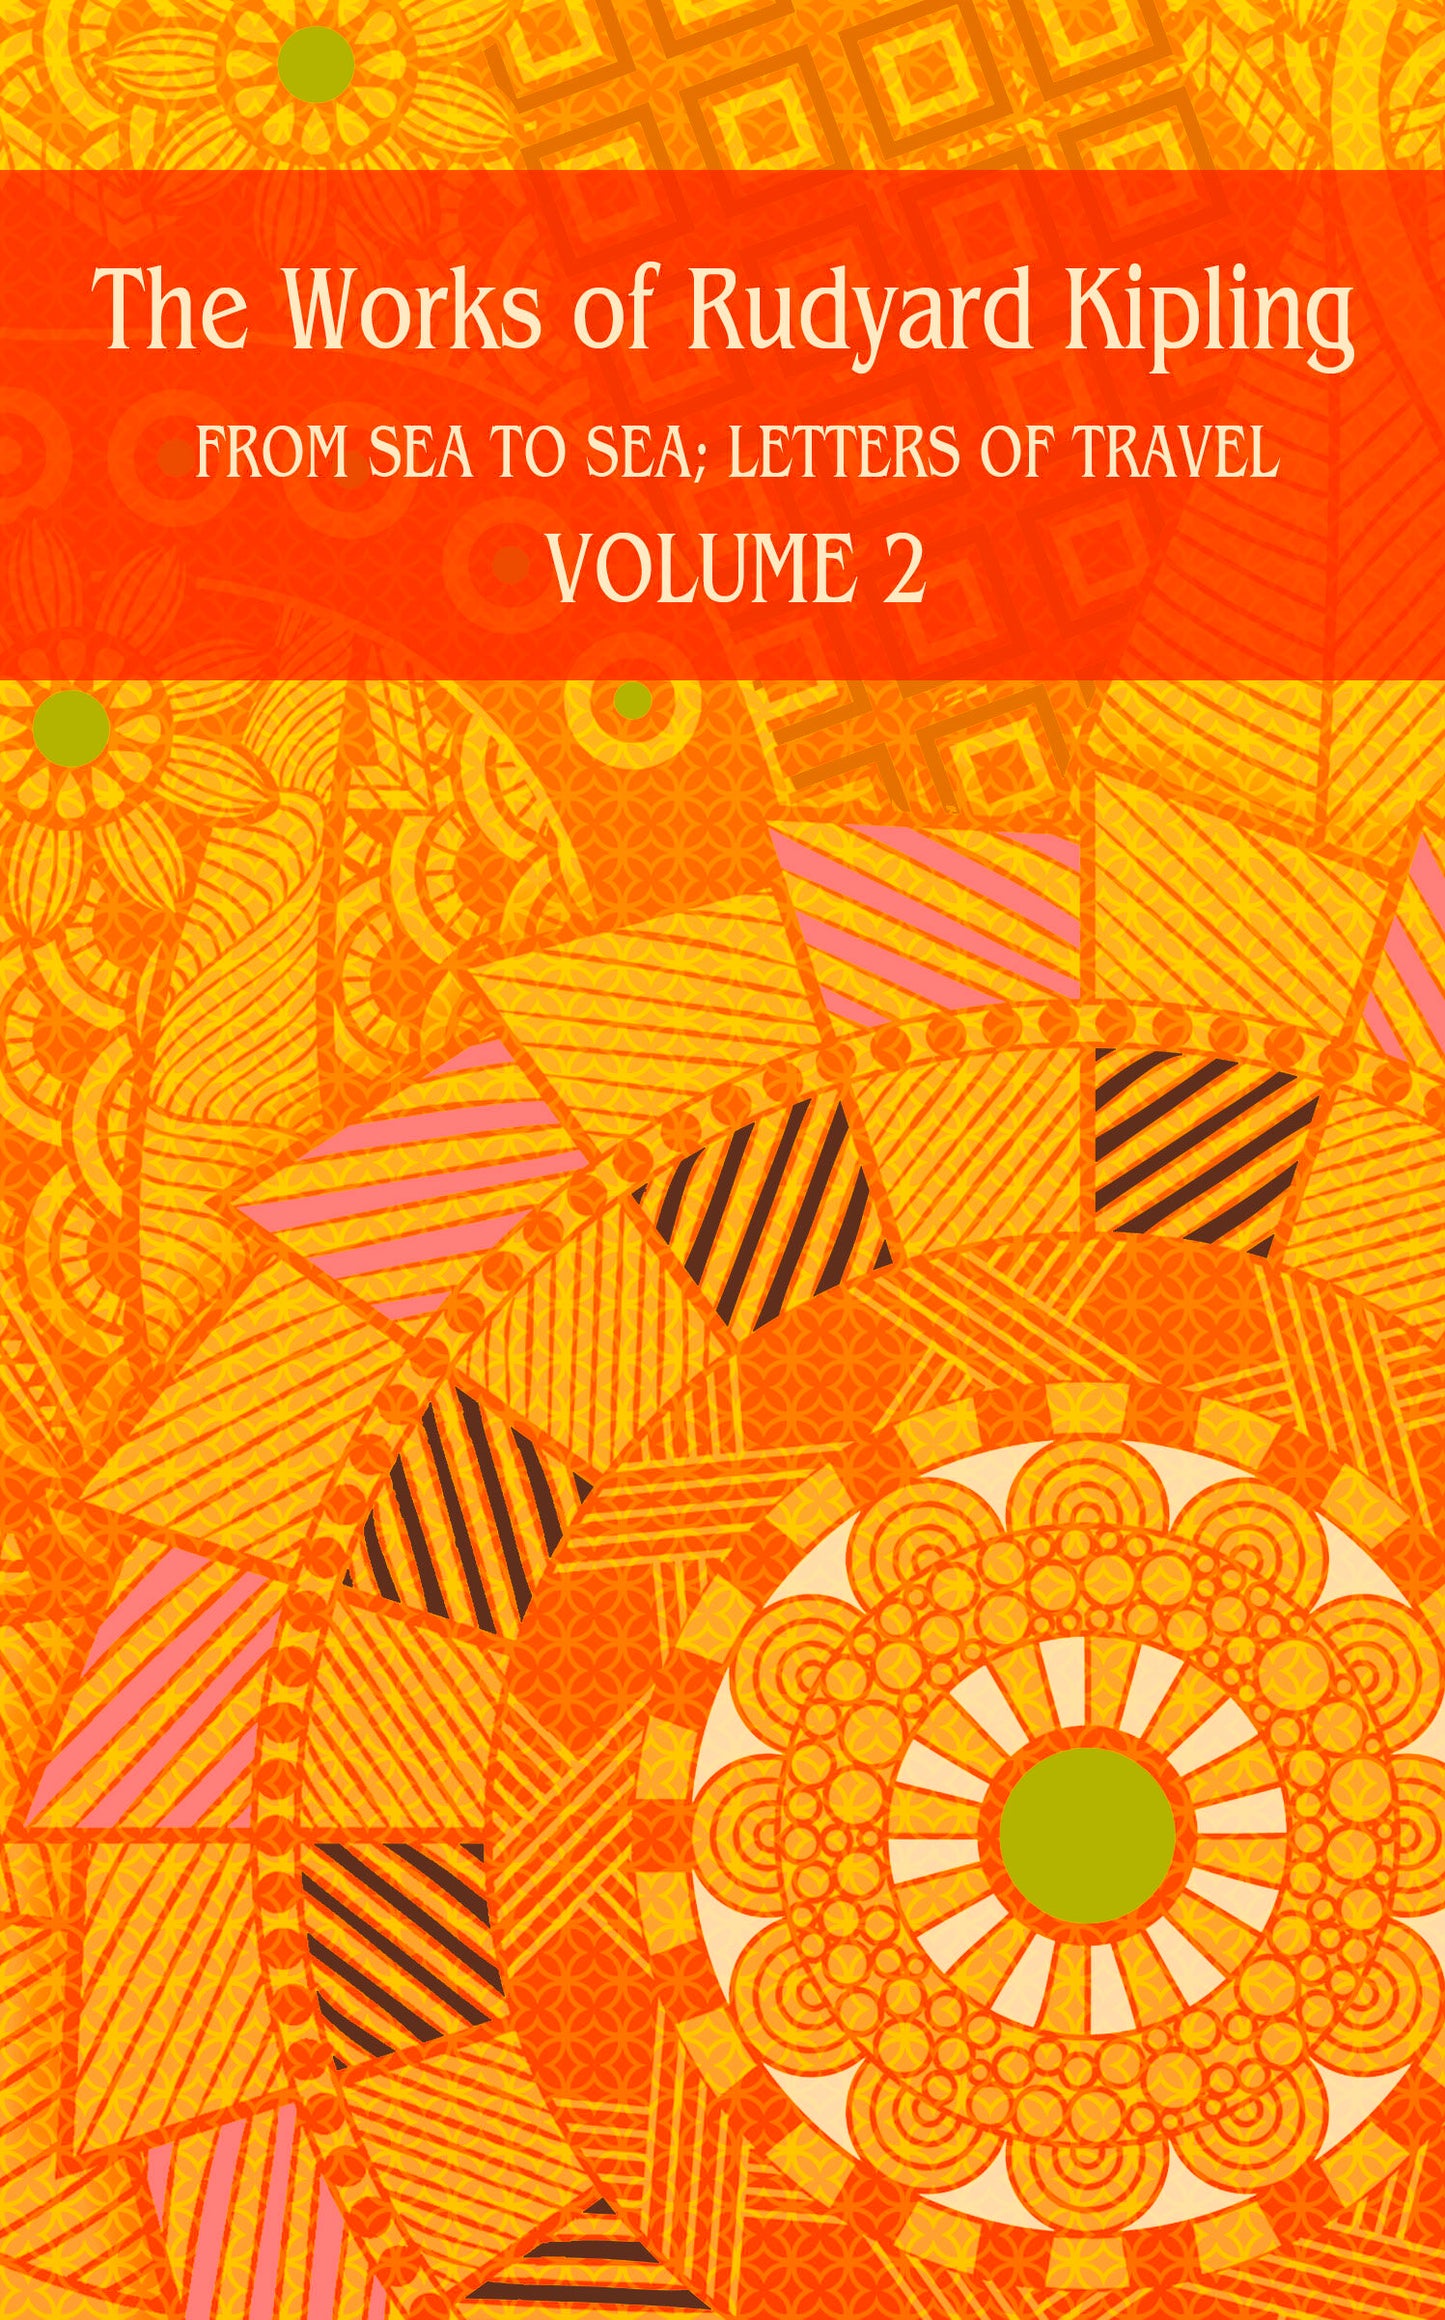 From Sea to Sea; Letters of Travel. Volume 2